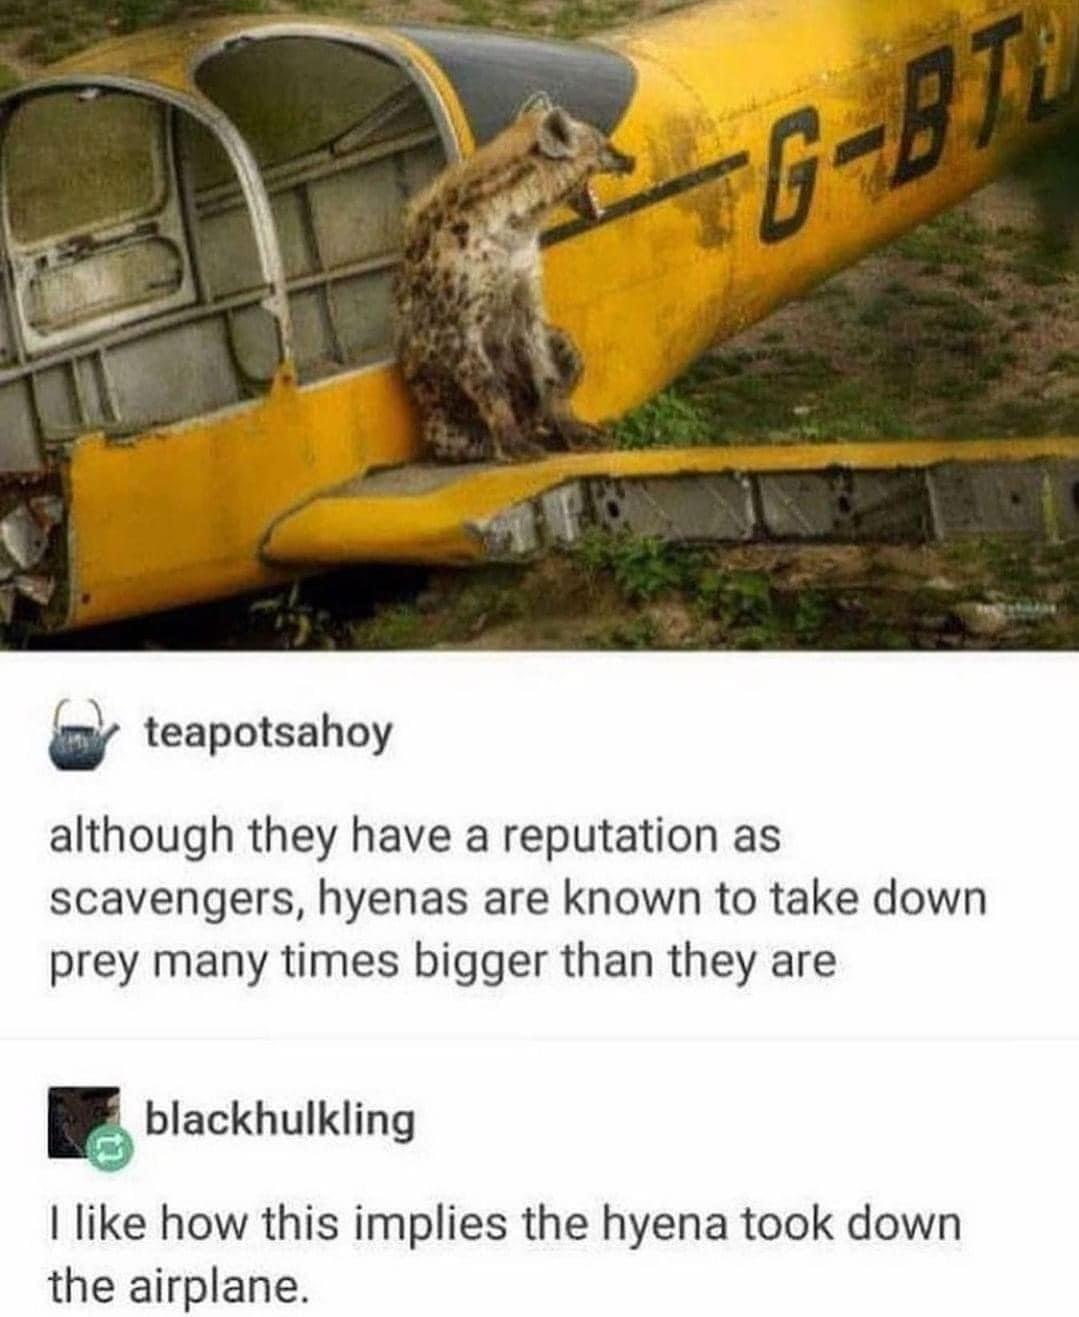 daily dose of pics and memes - posts plane - GBth teapotsahoy although they have a reputation as scavengers, hyenas are known to take down prey many times bigger than they are blackhulkling I how this implies the hyena took down the airplane.